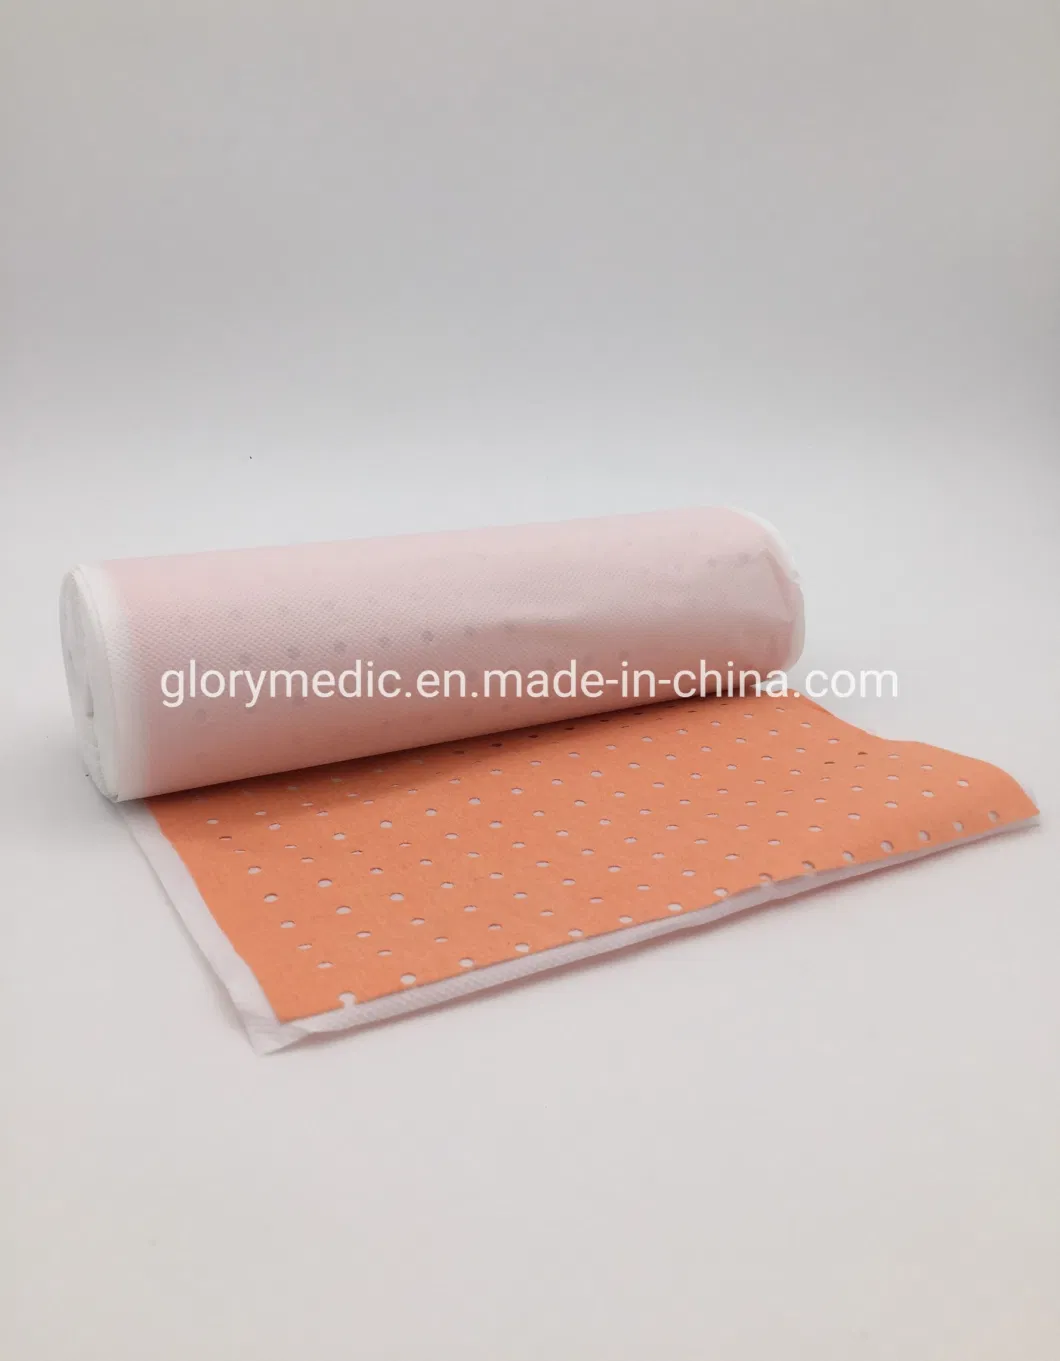 Hot Sale Surgical Perforated Plaster Zinc Oxide Perforated Plaster for Hospital